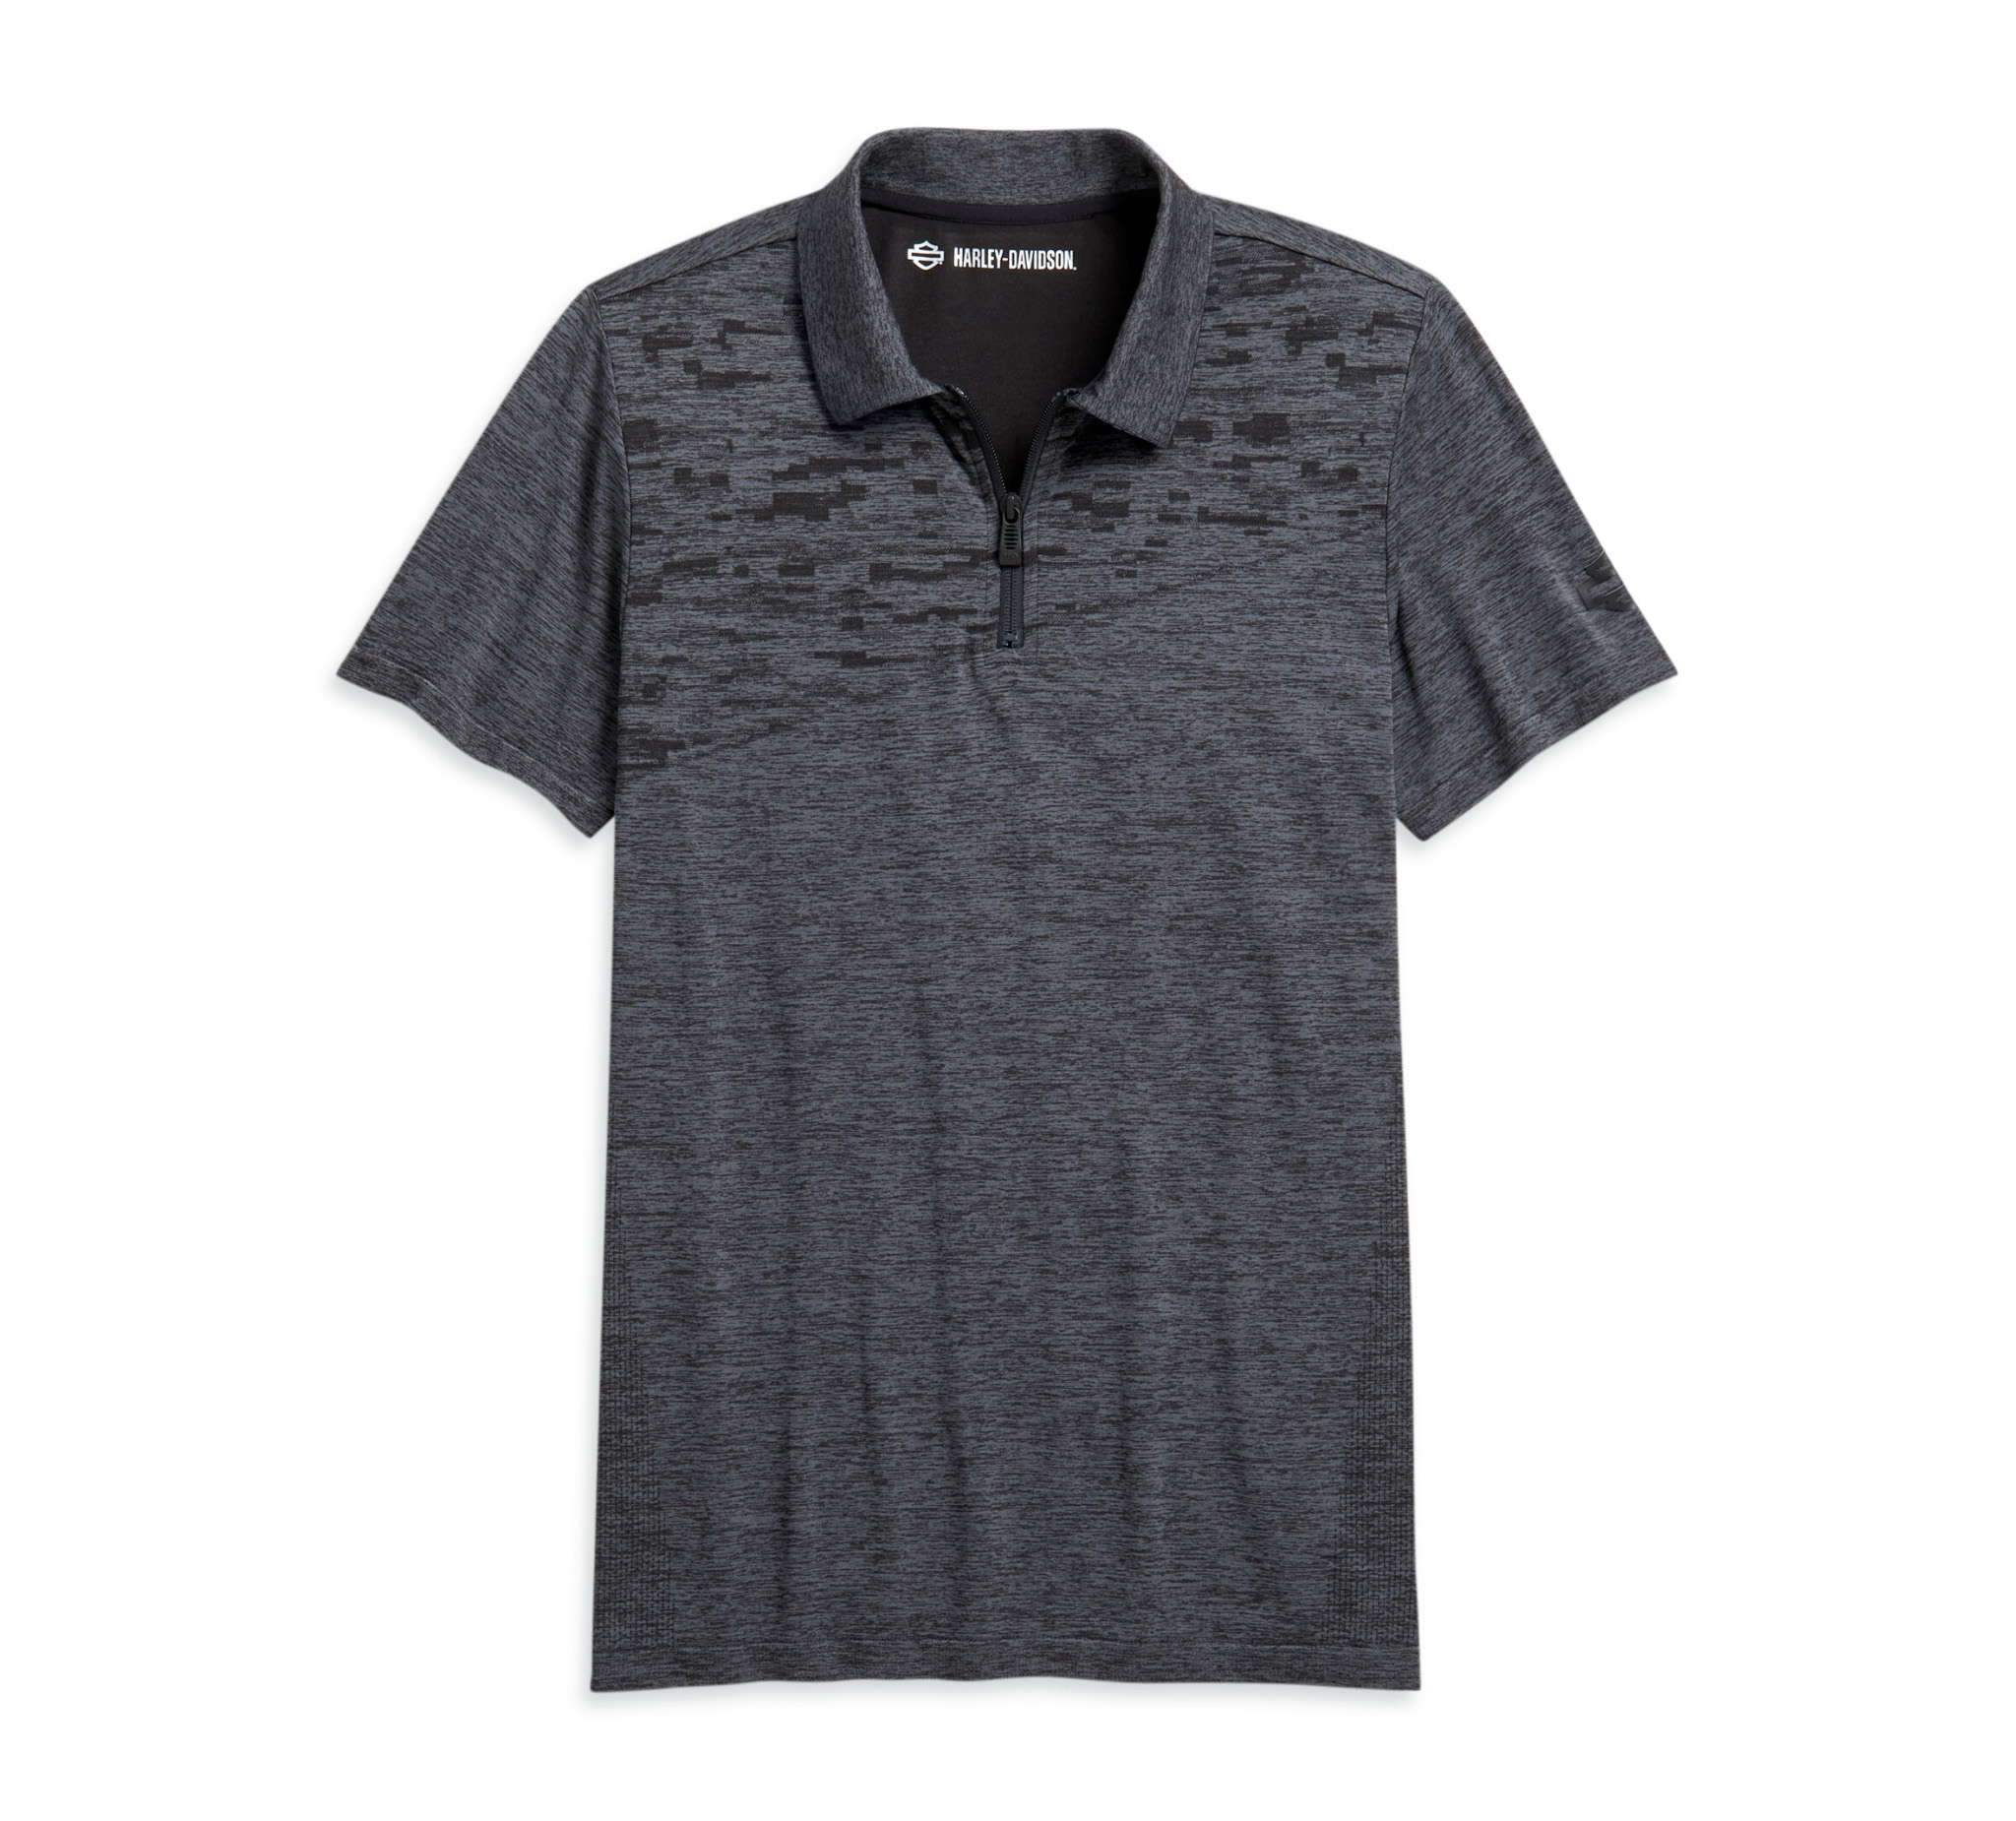 Men's Nearly Seamless Jacquard Polo - Slim Fit - 96343-20VH | Harley ...